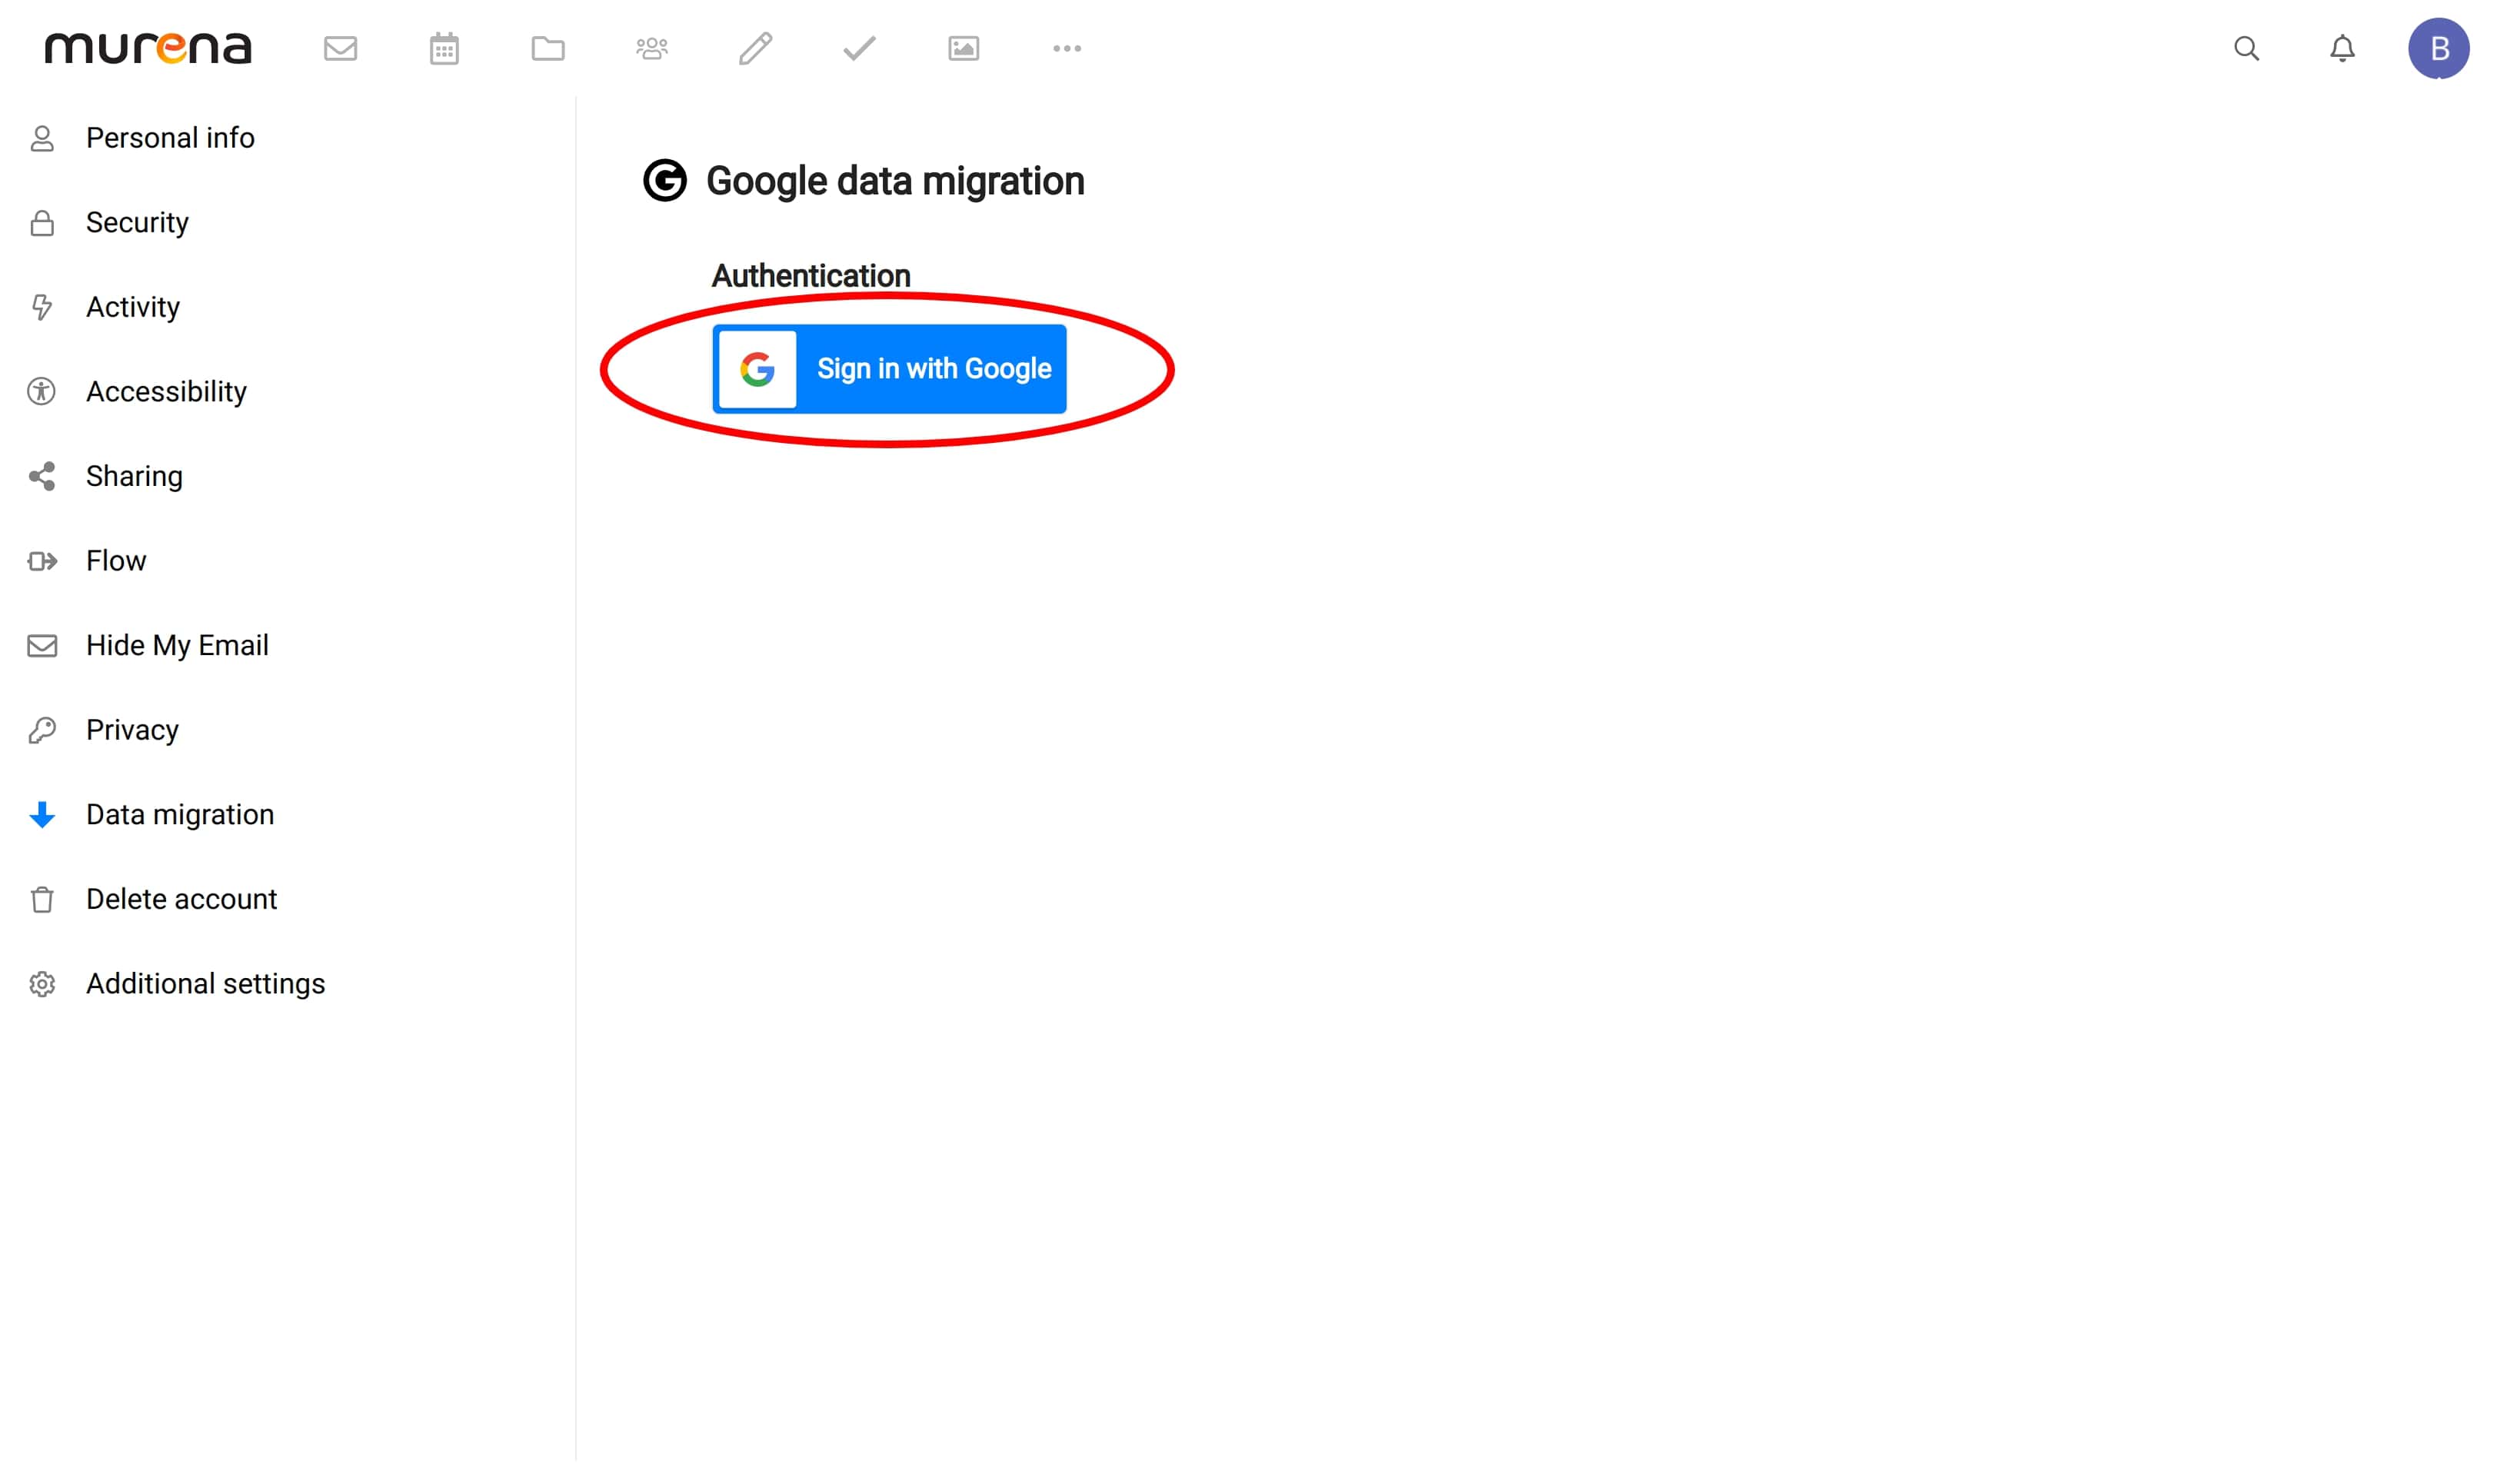 Screen showing how to sign in with Google